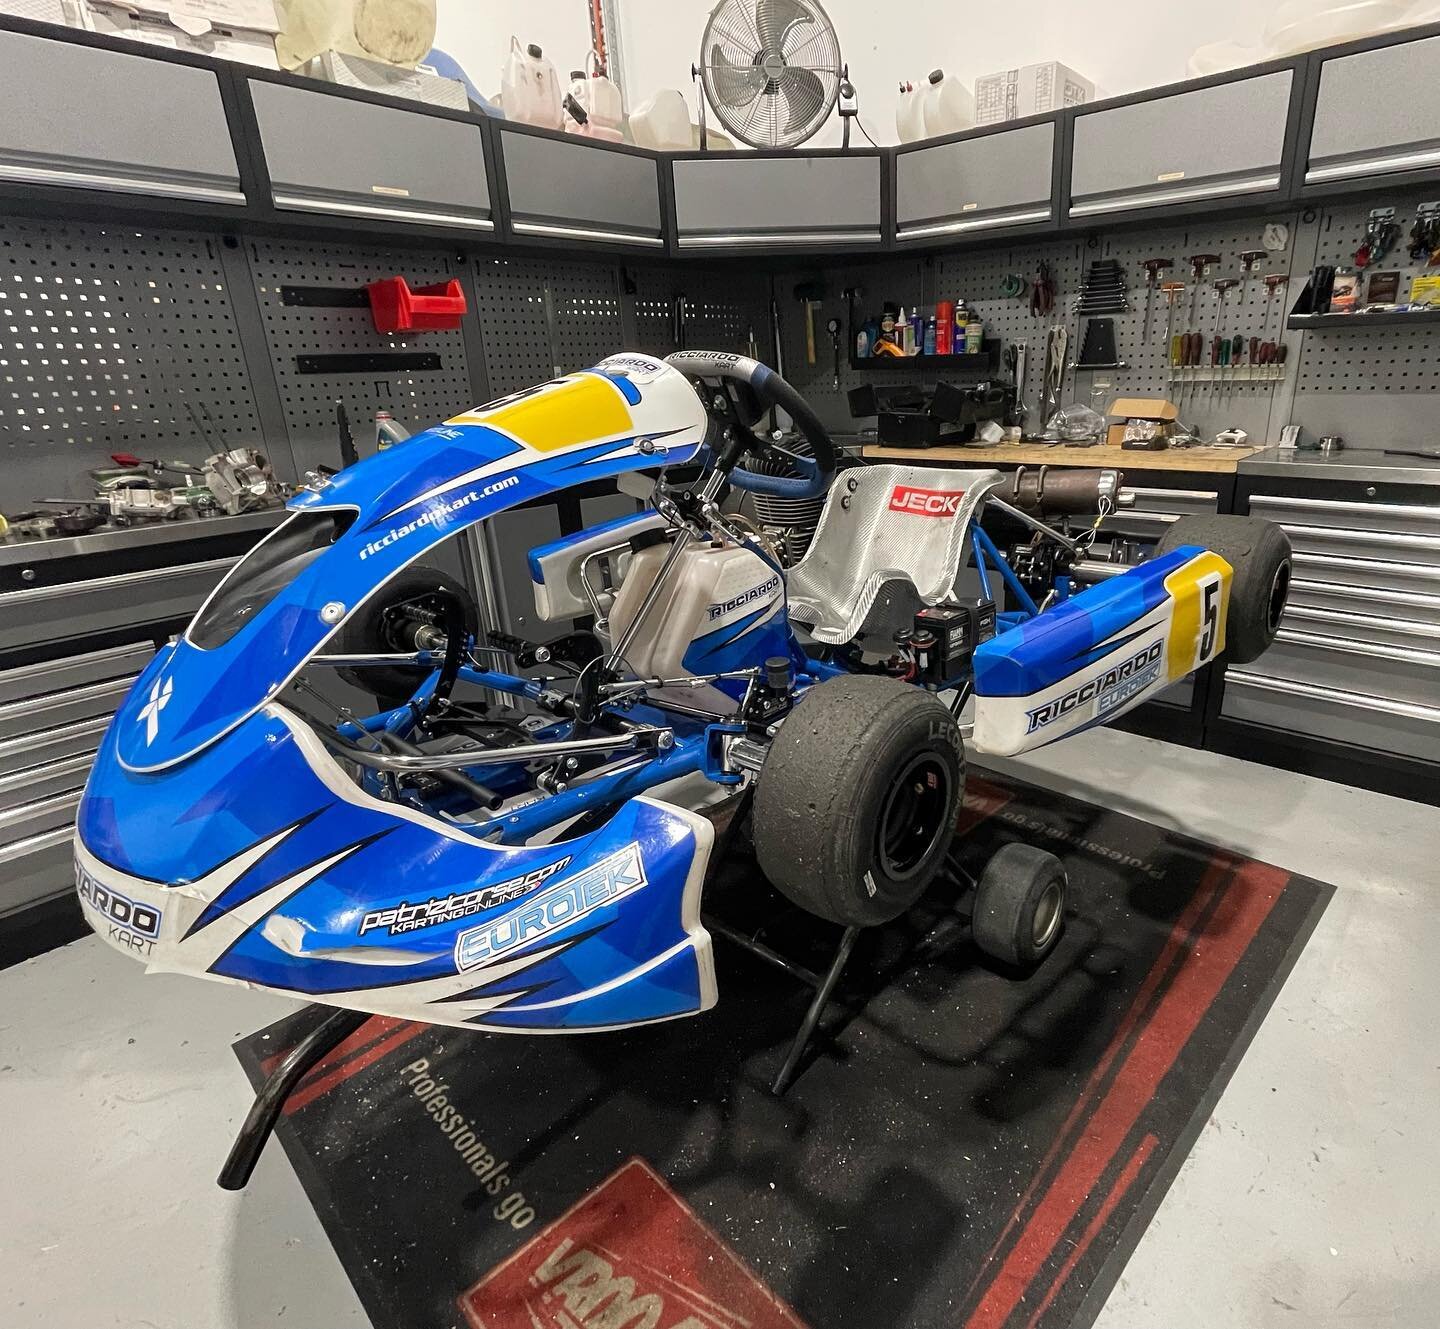 The first club meeting win for Olivier Joynes in KA3J Heavy in the Ricciardo S14 chassis at Wanneroo Raceway and continues to show consistent progress since starting the sport. Good job!

#eurotek #birelart #iame #lecont #vrooamlubricants #patrizicor